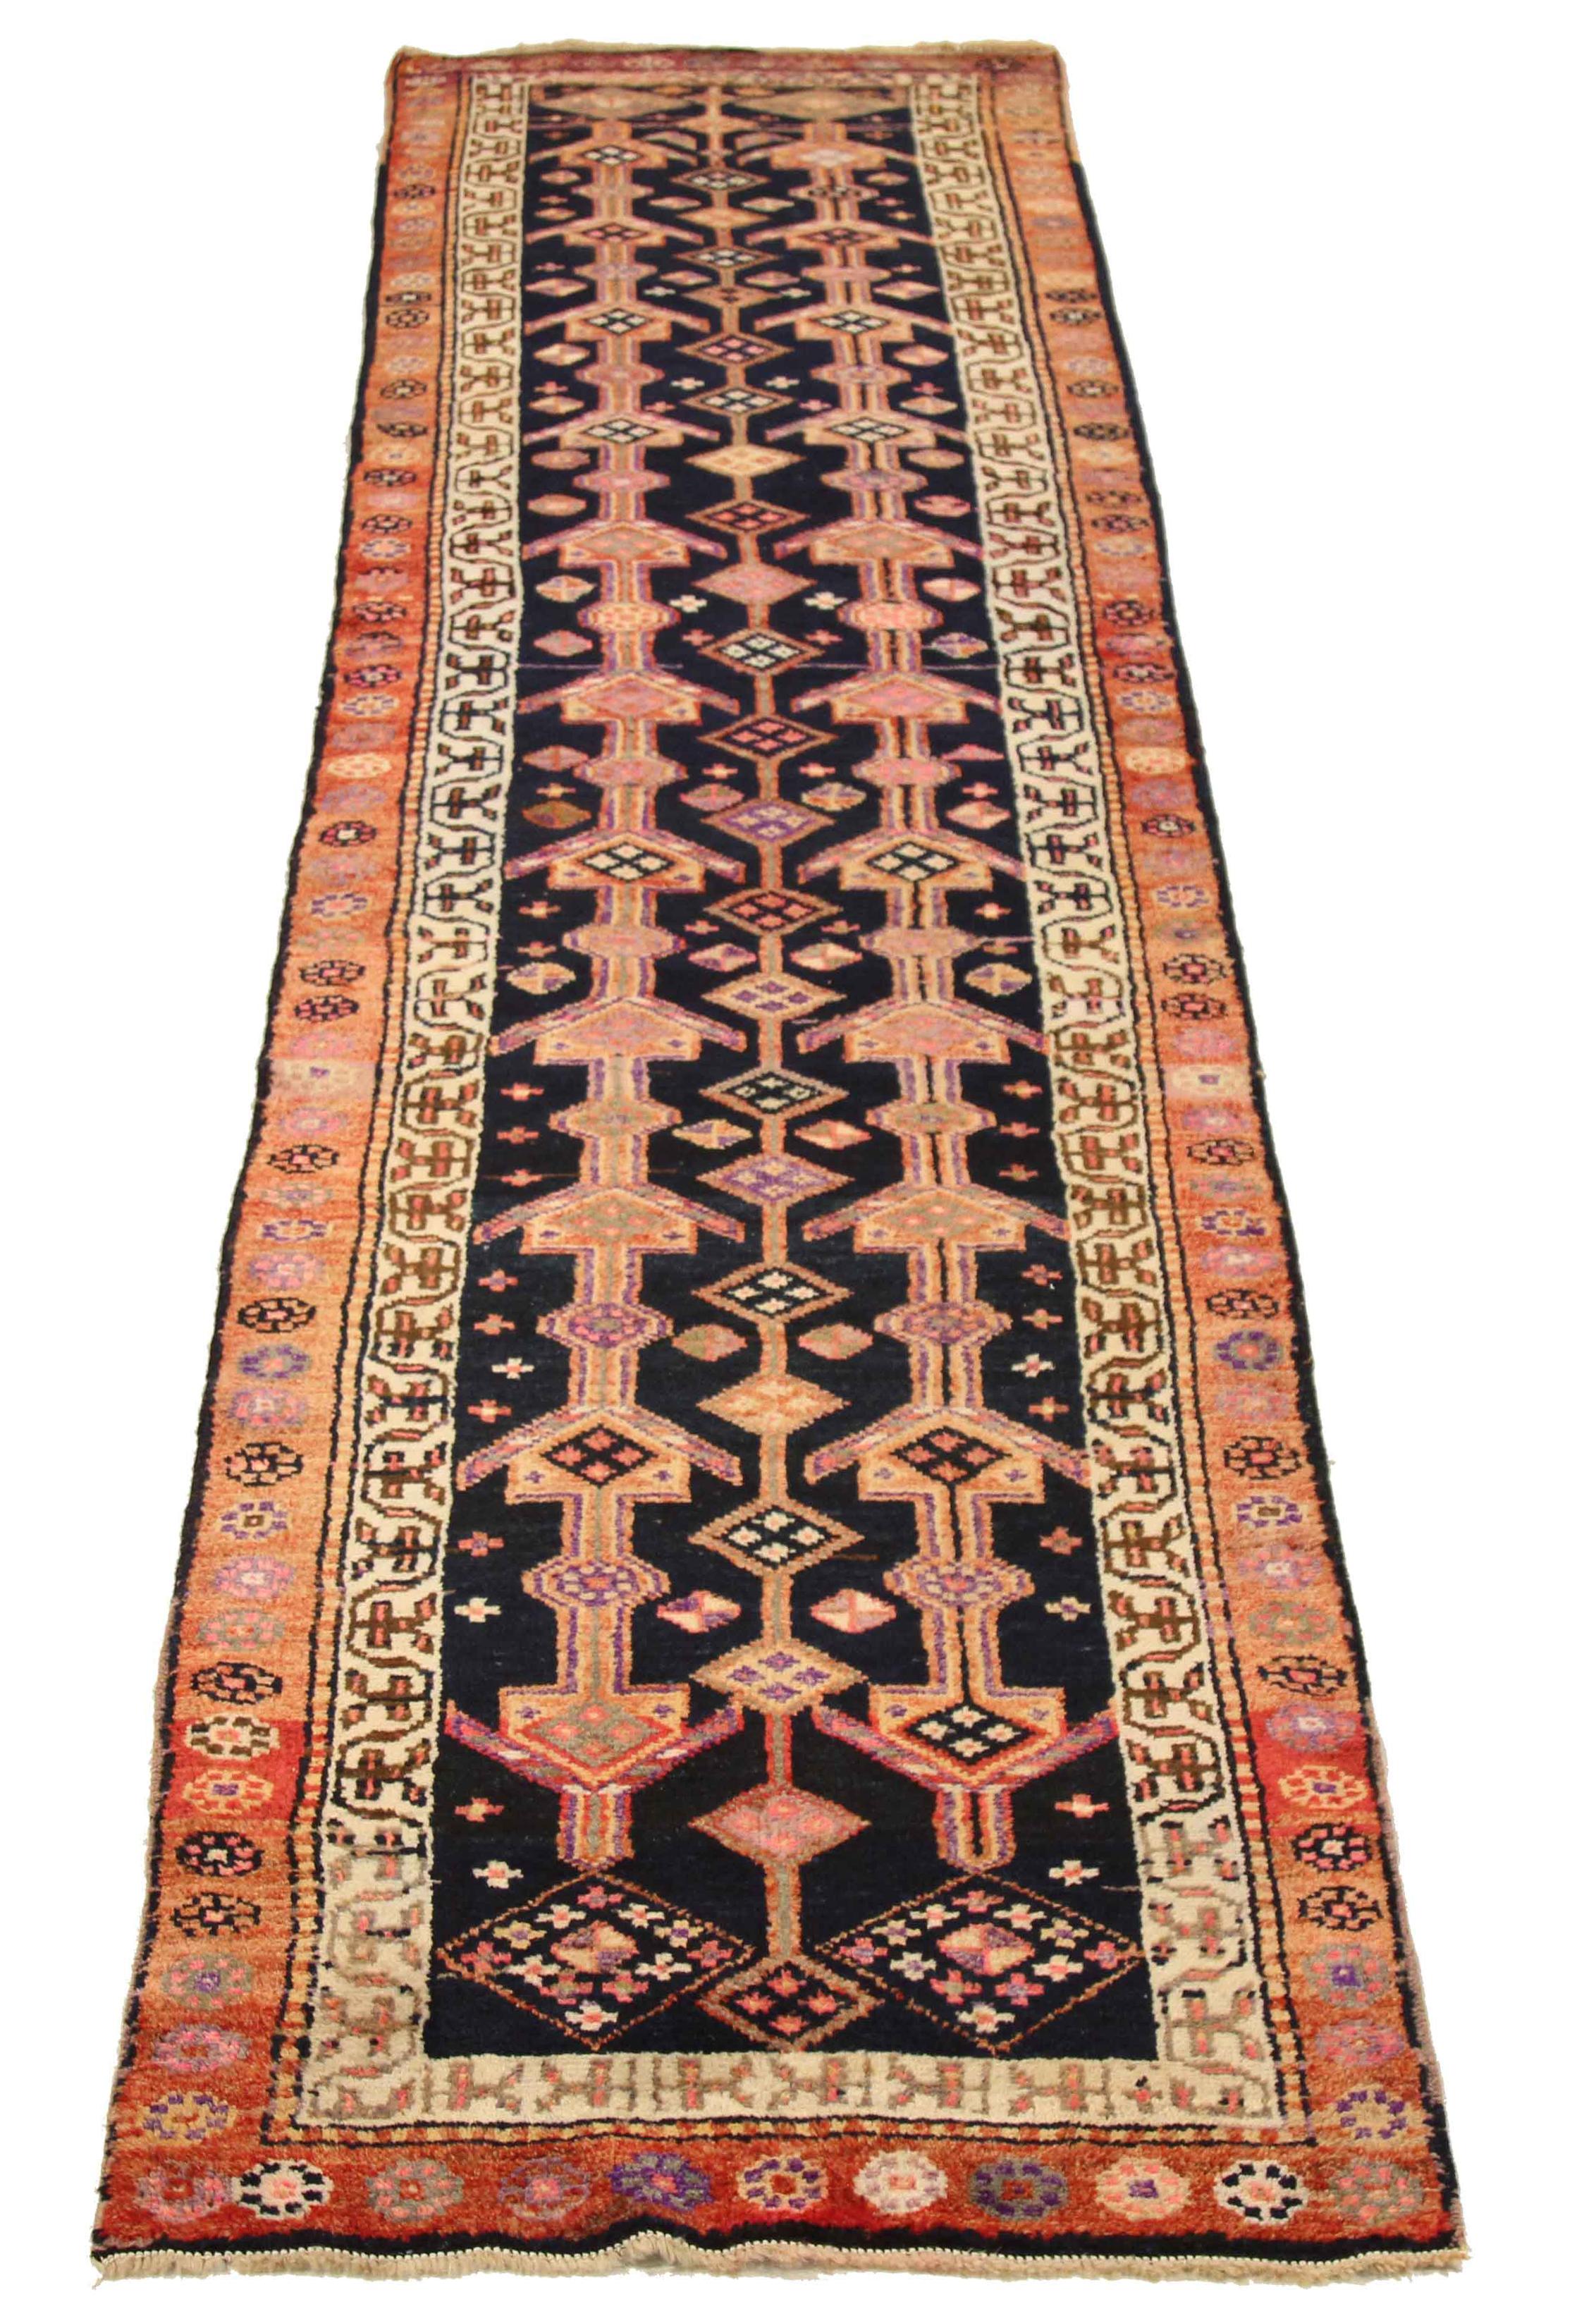 Antique Persian runner rug handwoven from the finest sheep’s wool. It’s colored with all-natural vegetable dyes that are safe for humans and pets. It’s a traditional Azarbaijan design handwoven by expert artisans. It’s a lovely runner rug that can